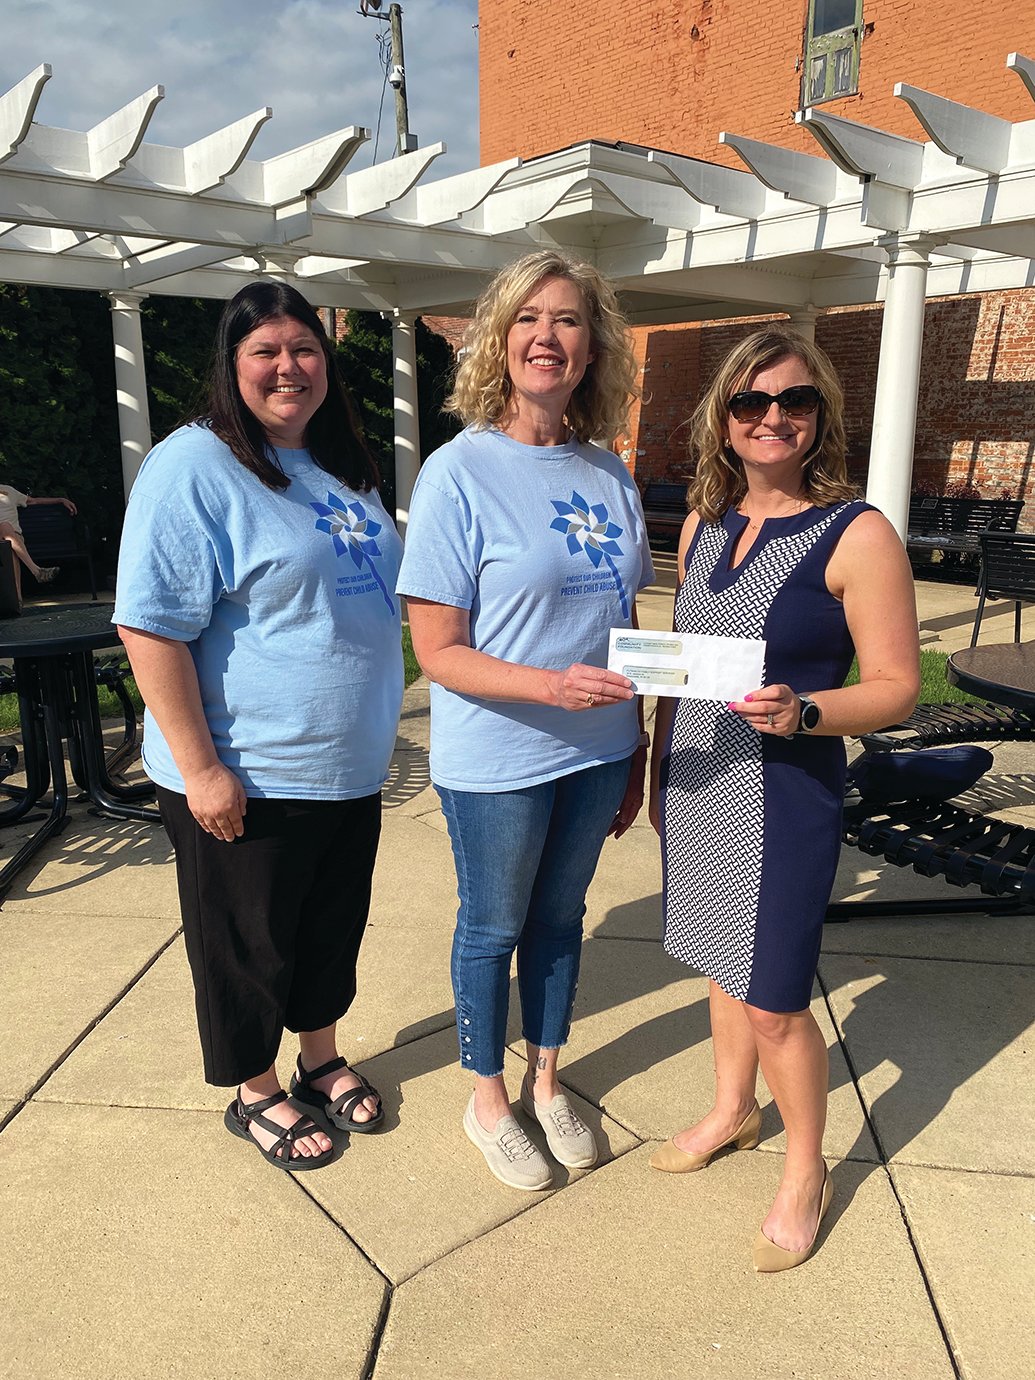 Starla Bradley, from left, Sherri Nield and Jessica Bokhart comprise the Healthy Families check presentation during a WLF event Monday at Marie Canine Plaza.